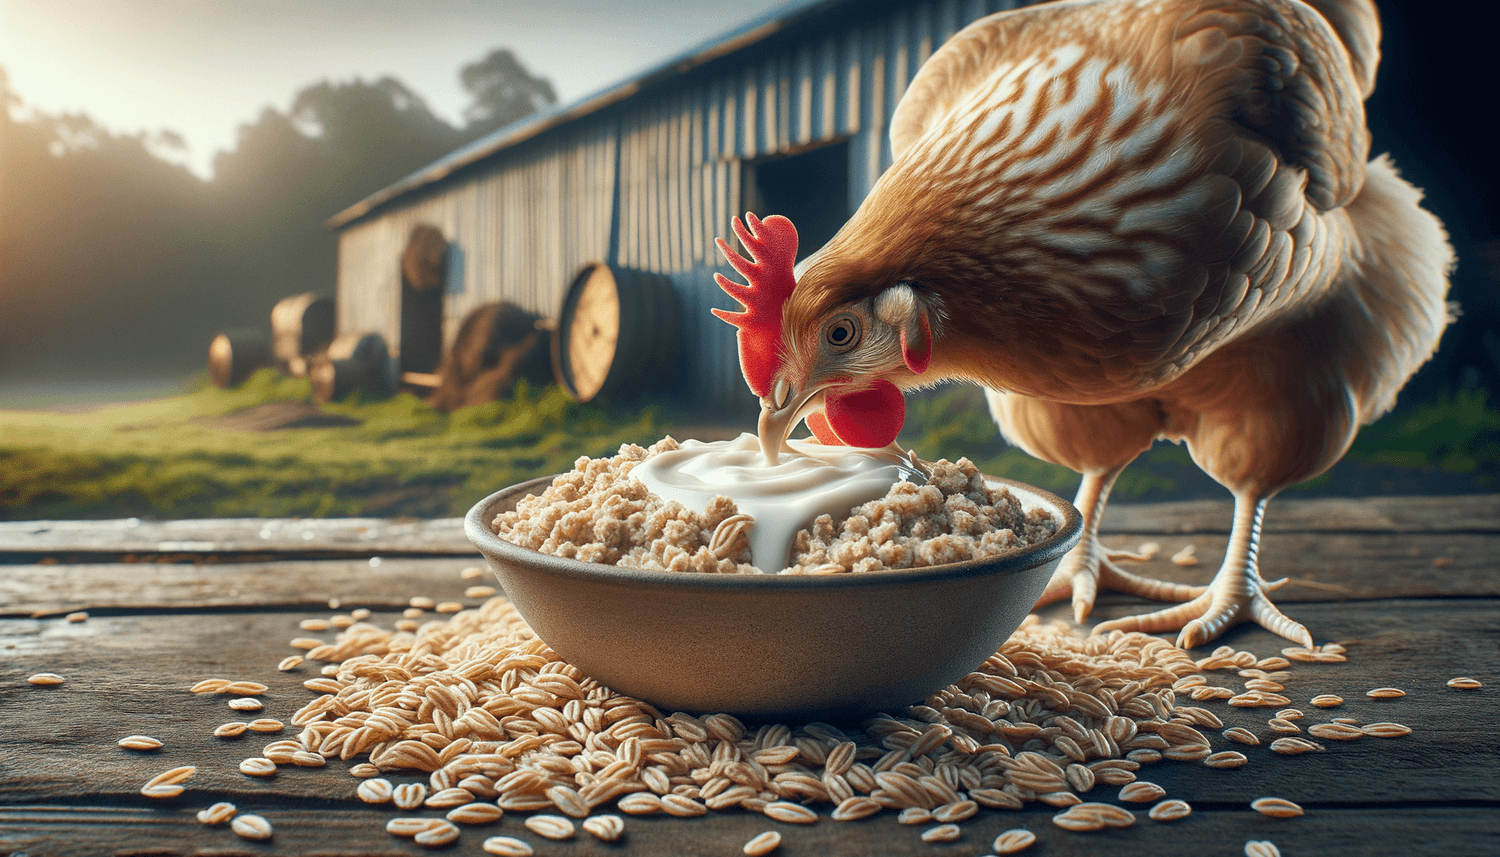 Can Chickens Eat Cream Of Wheat?